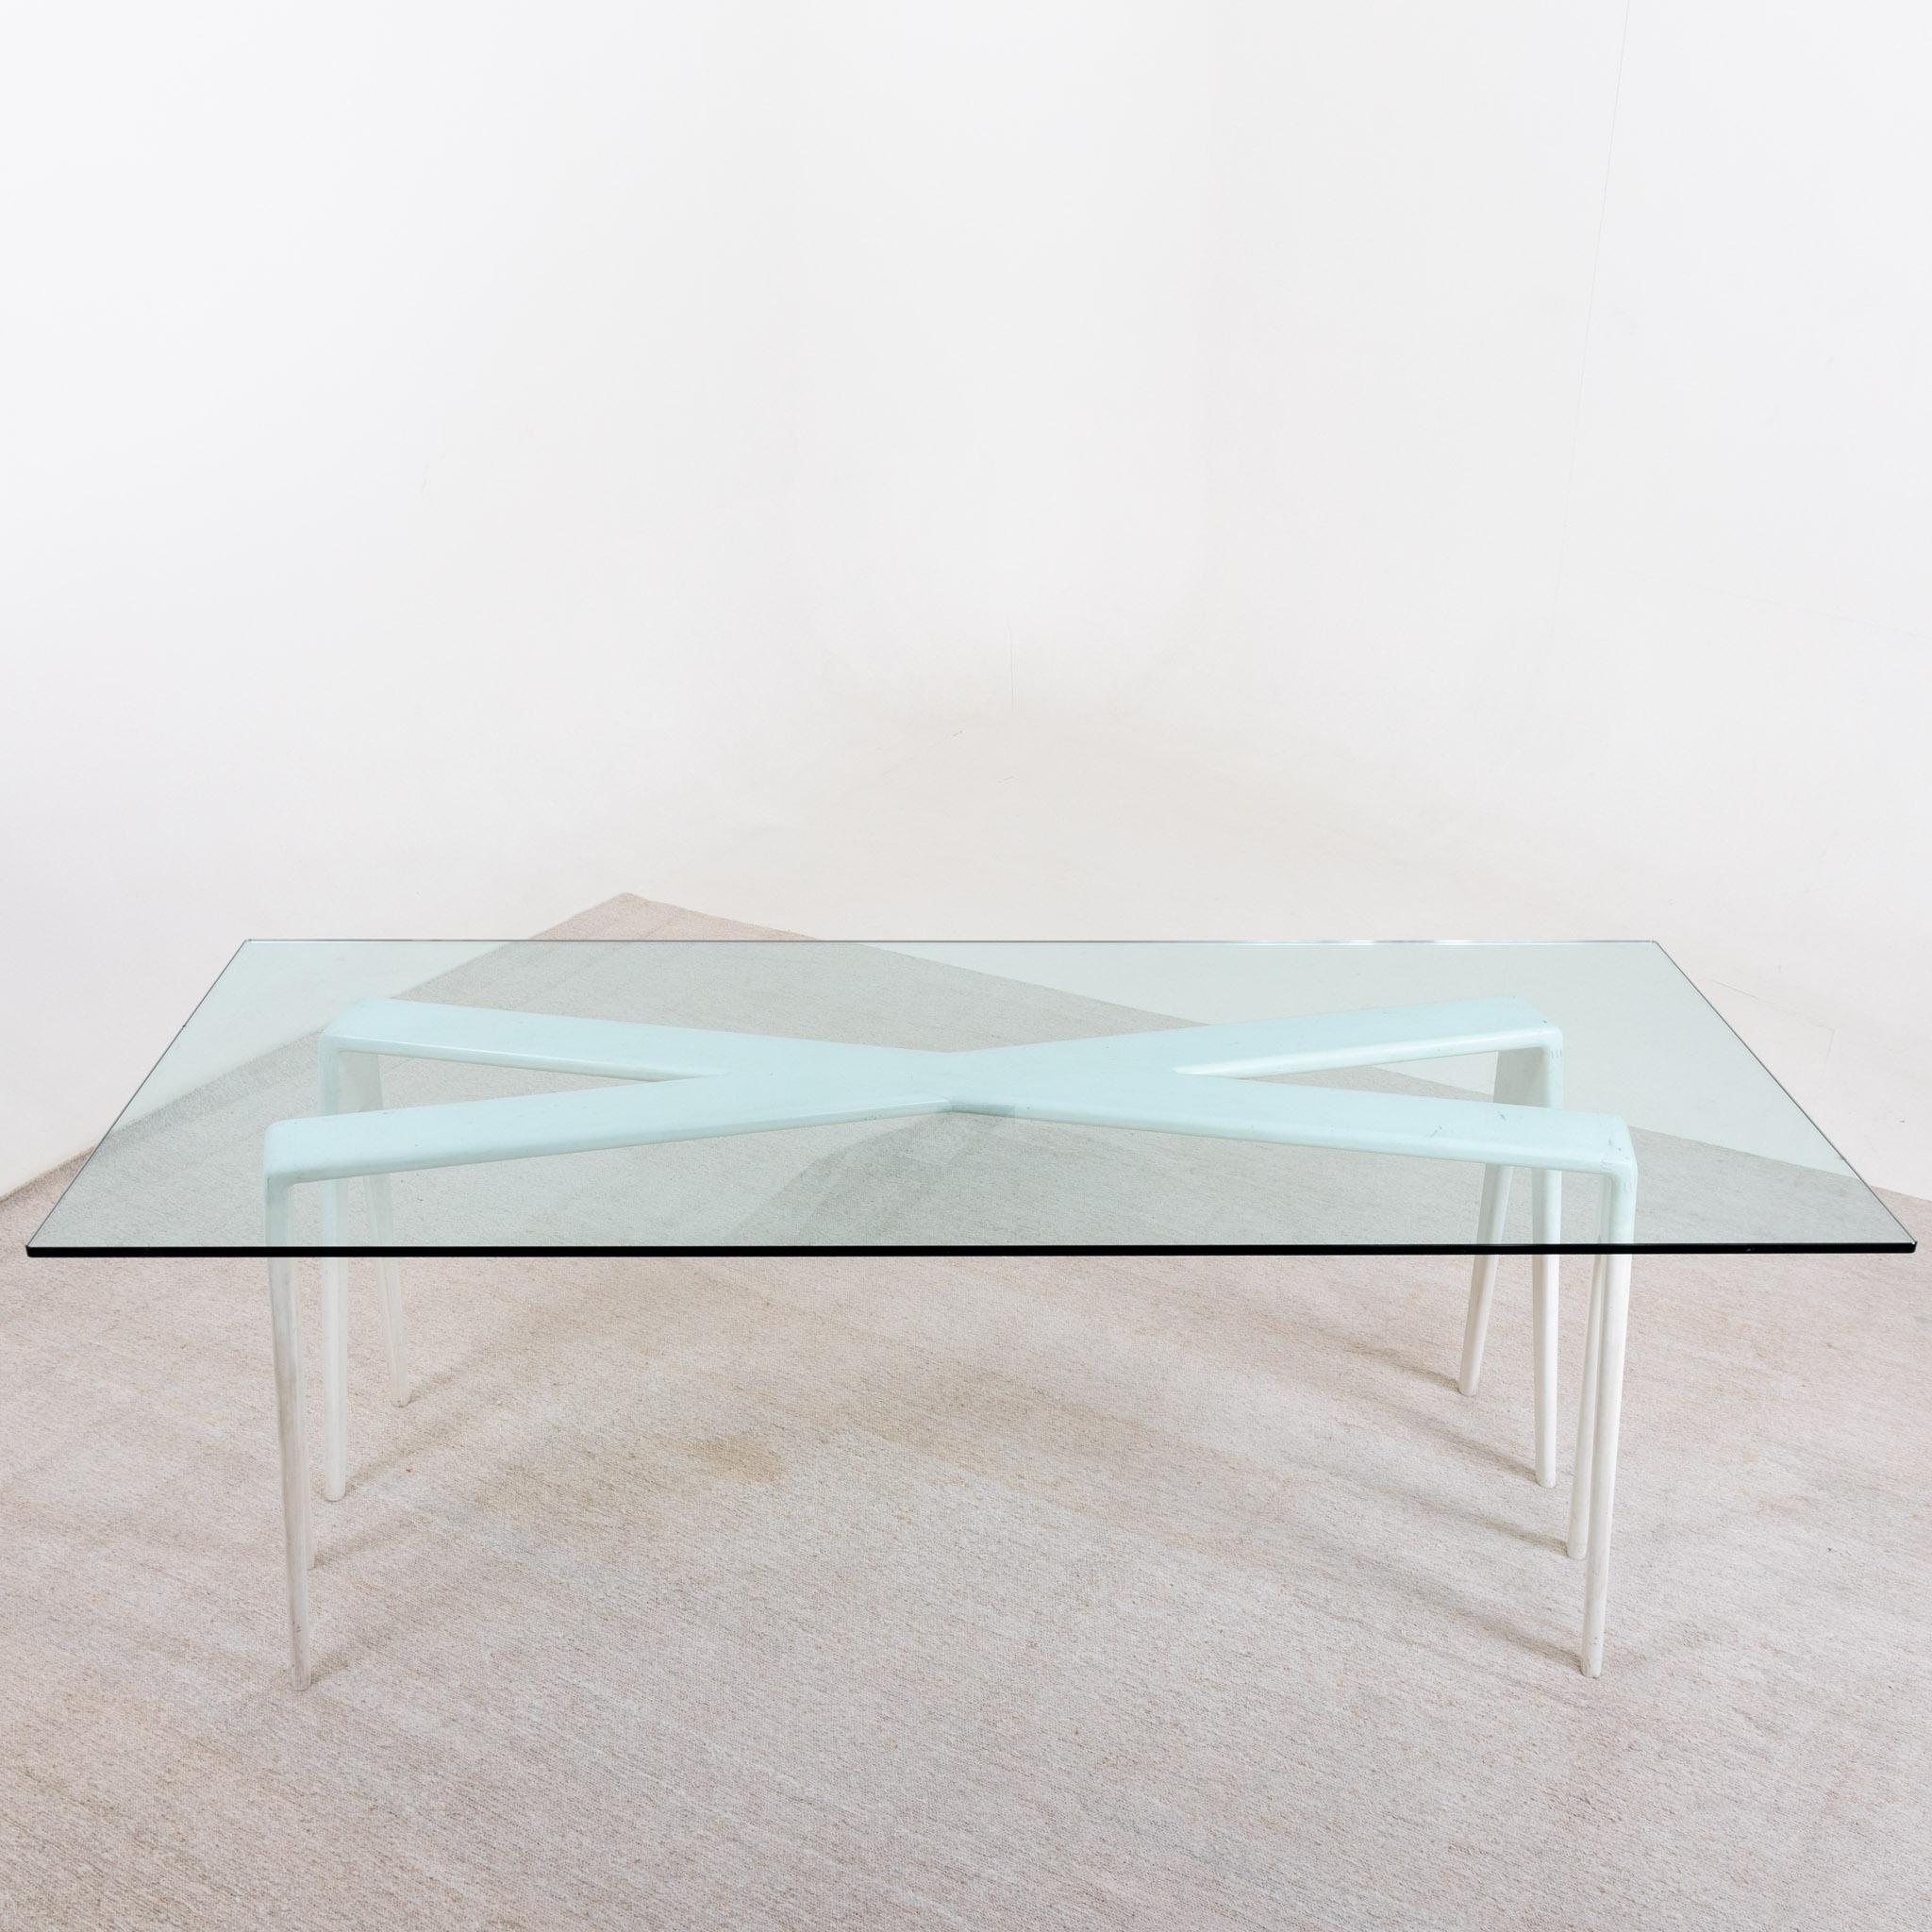 Modern White Dining Table with Glass Top, Le Opere E i Giorni, Italy 20th Century For Sale